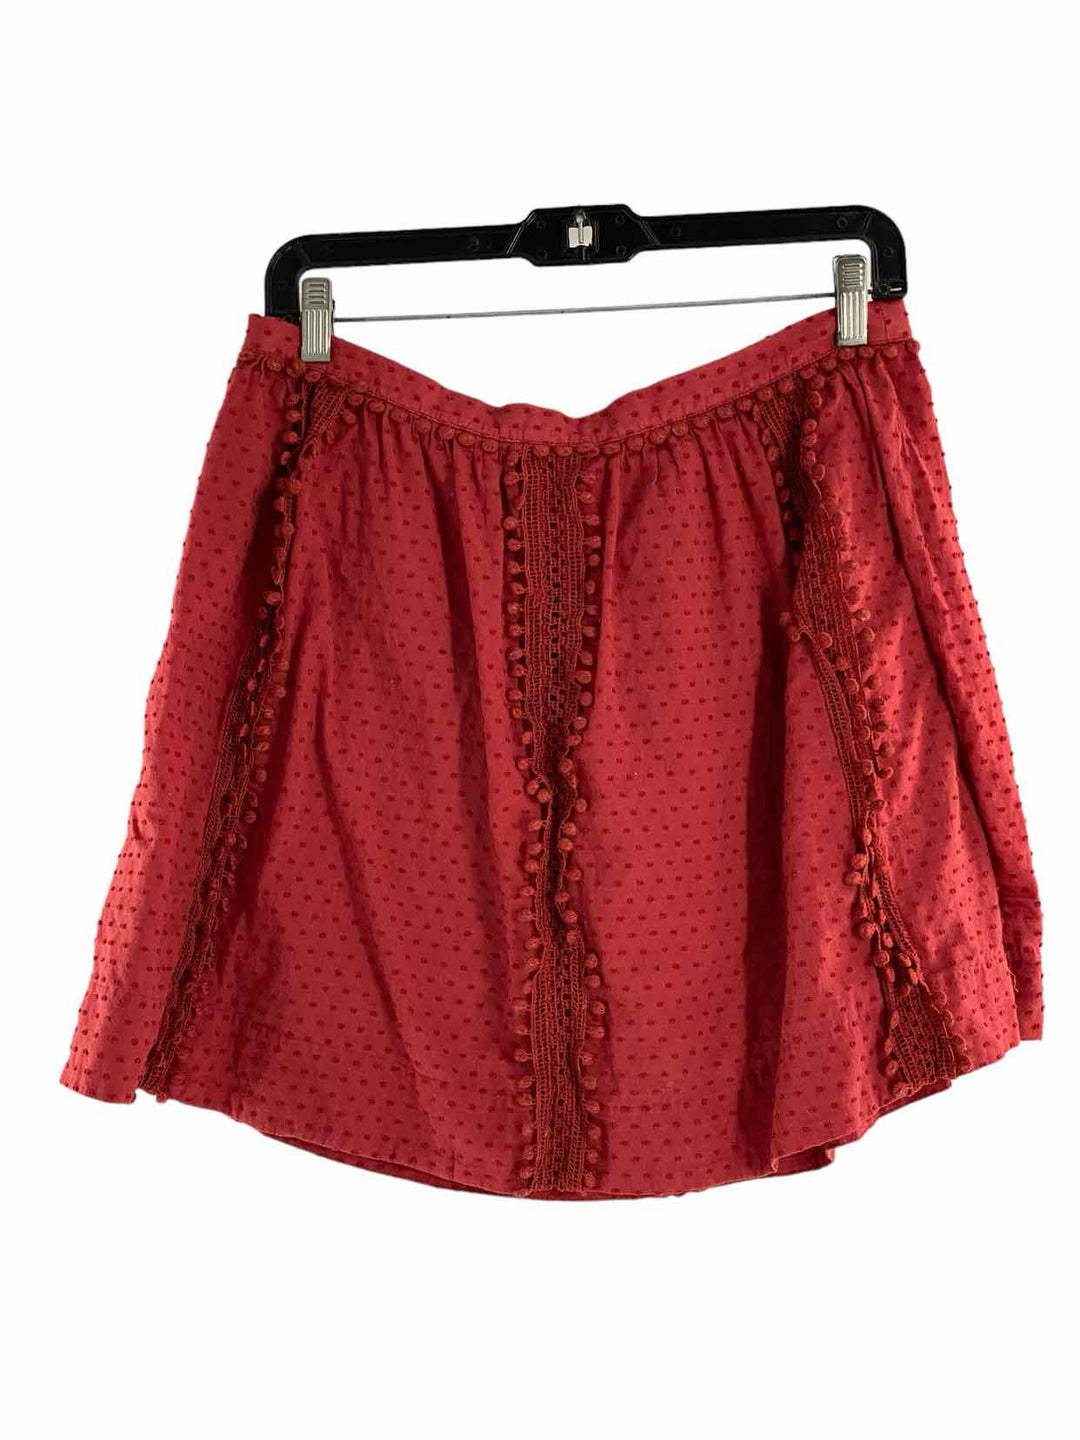 J. Crew Size 6 Red Dots Skirt